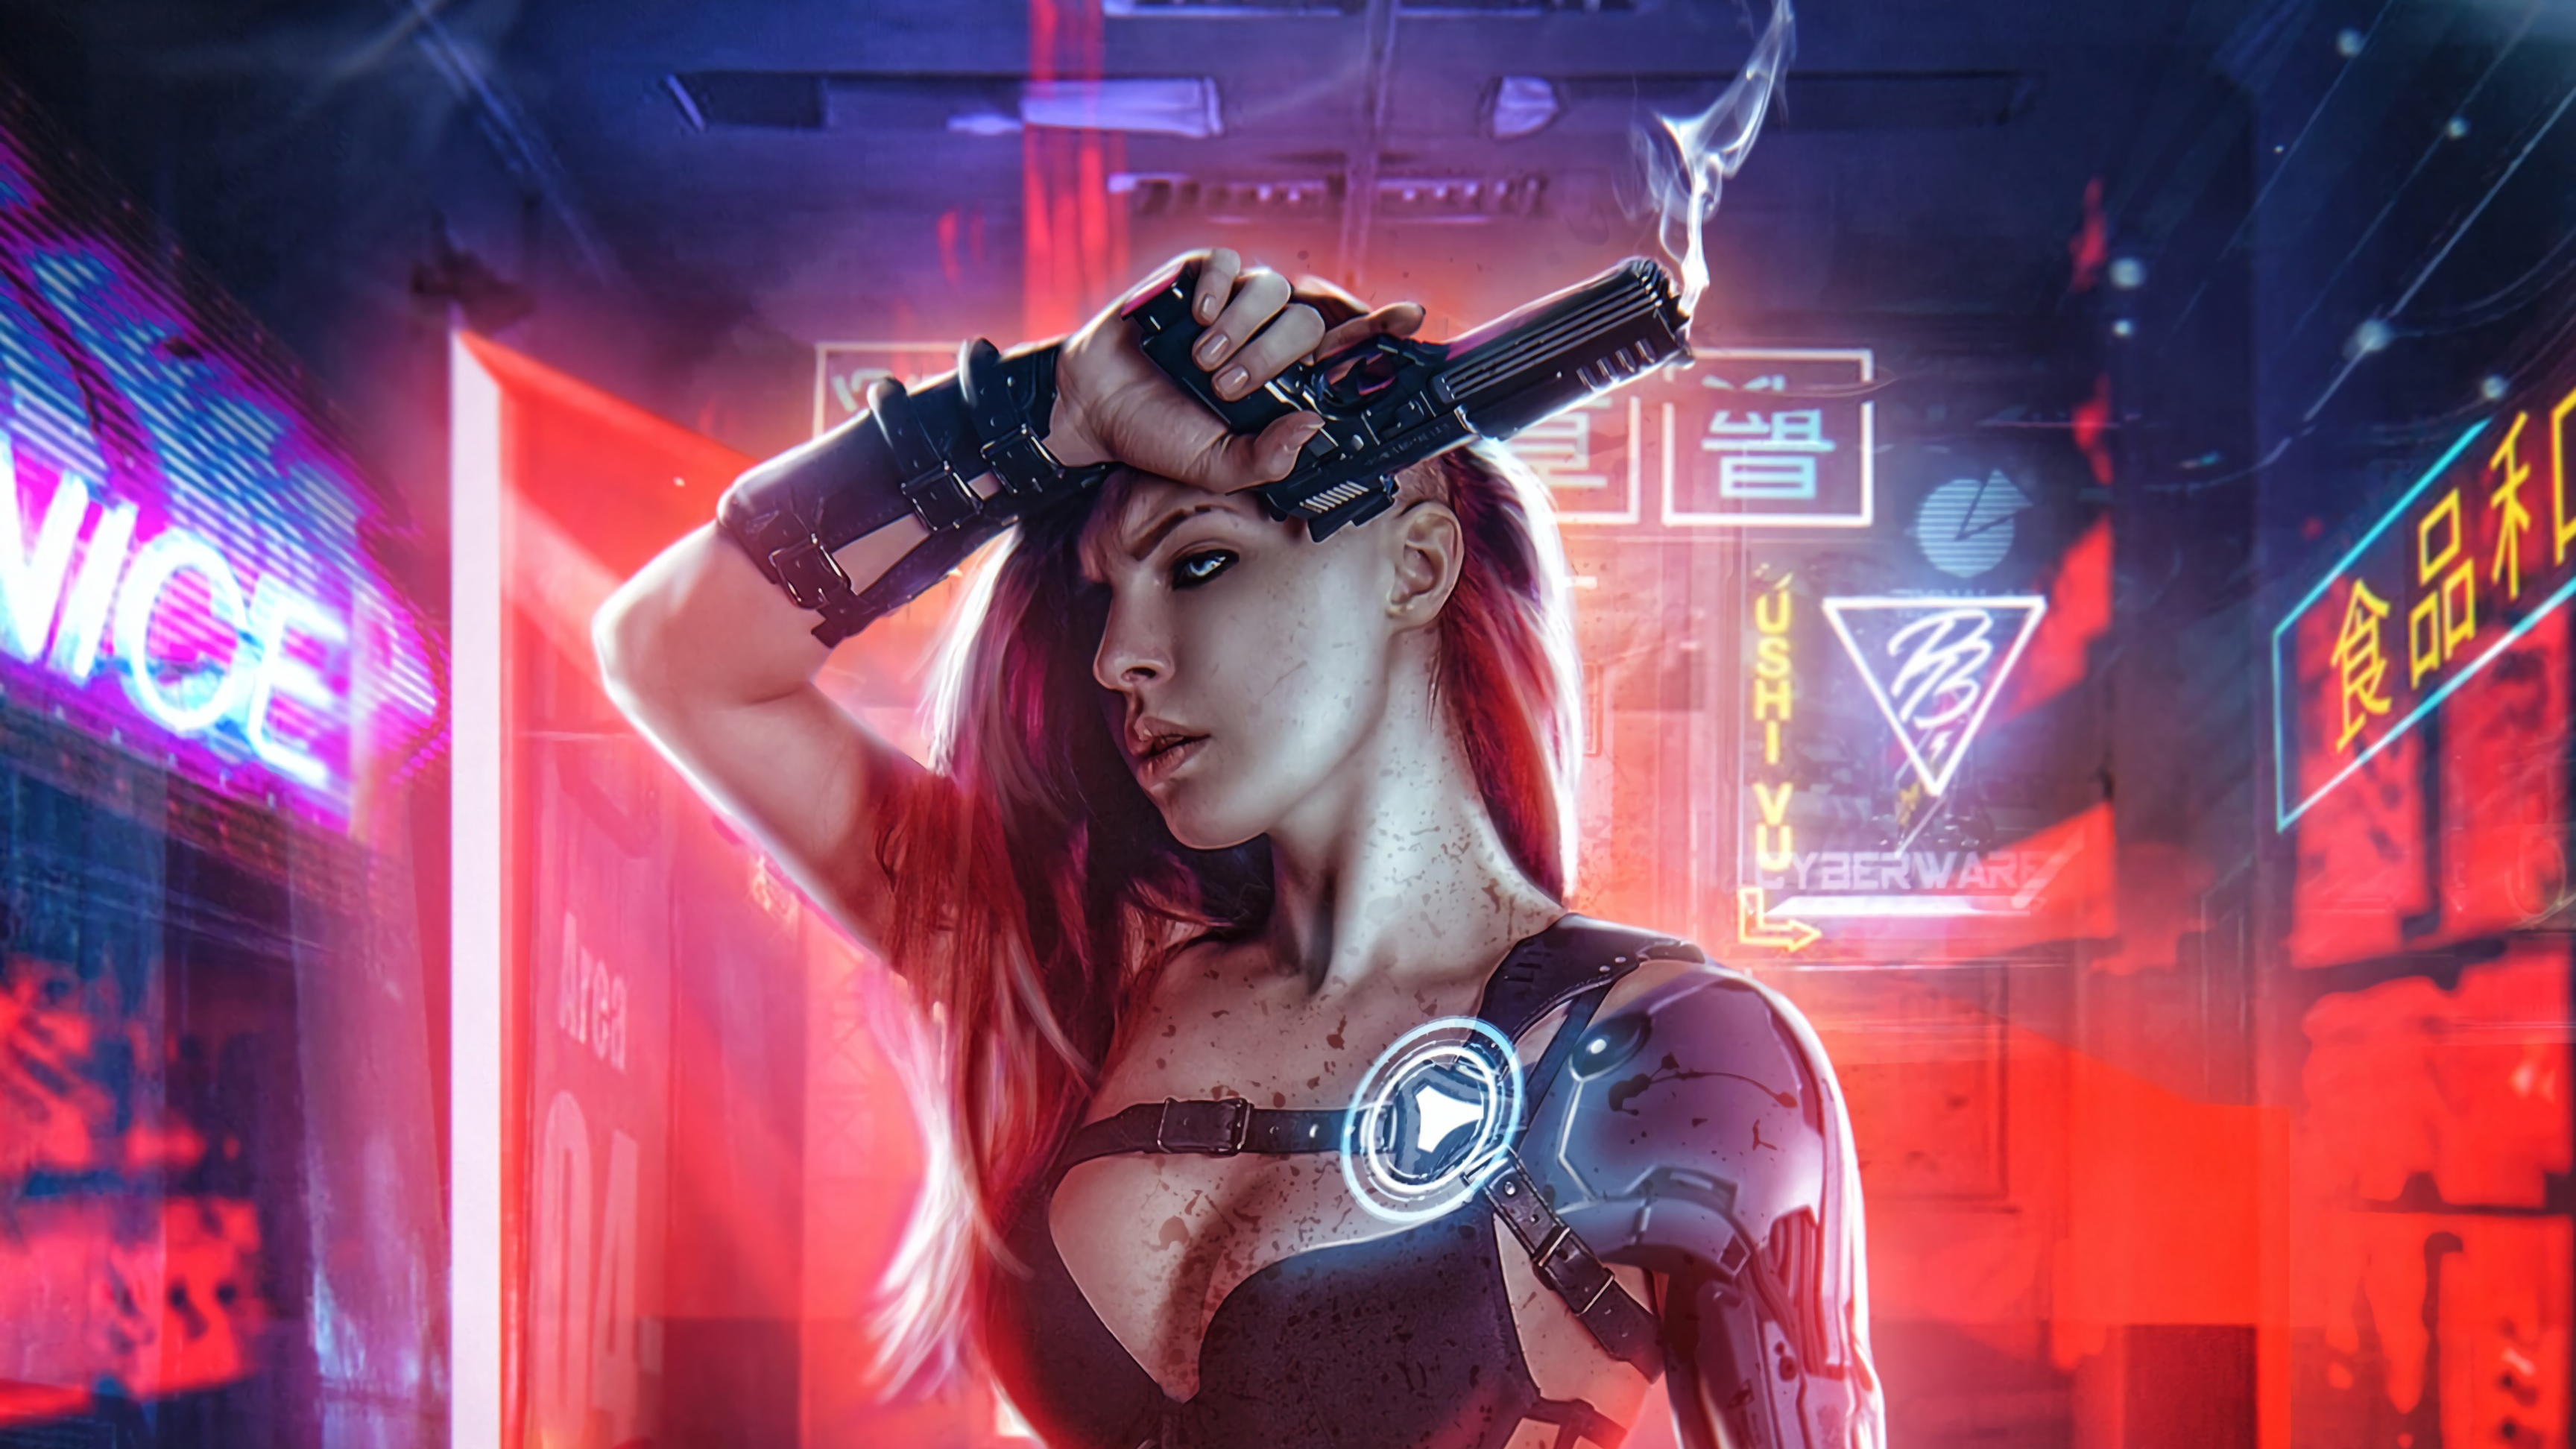 Cyberpunk Girl With Gun 4k Hd Artist 4k Wallpapers Images Backgrounds Photos And Pictures 7255